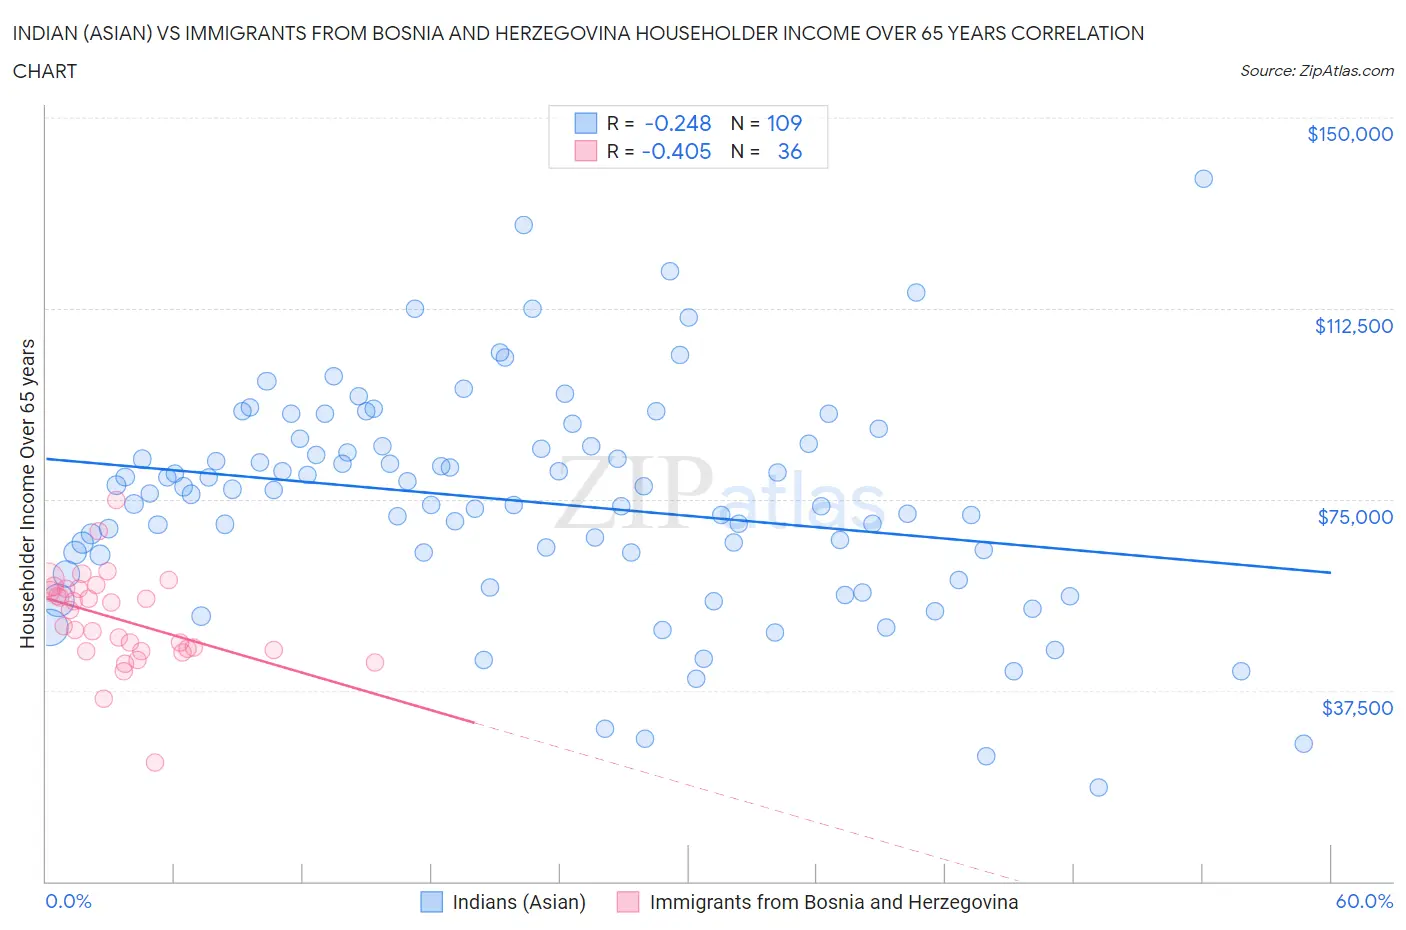 Indian (Asian) vs Immigrants from Bosnia and Herzegovina Householder Income Over 65 years